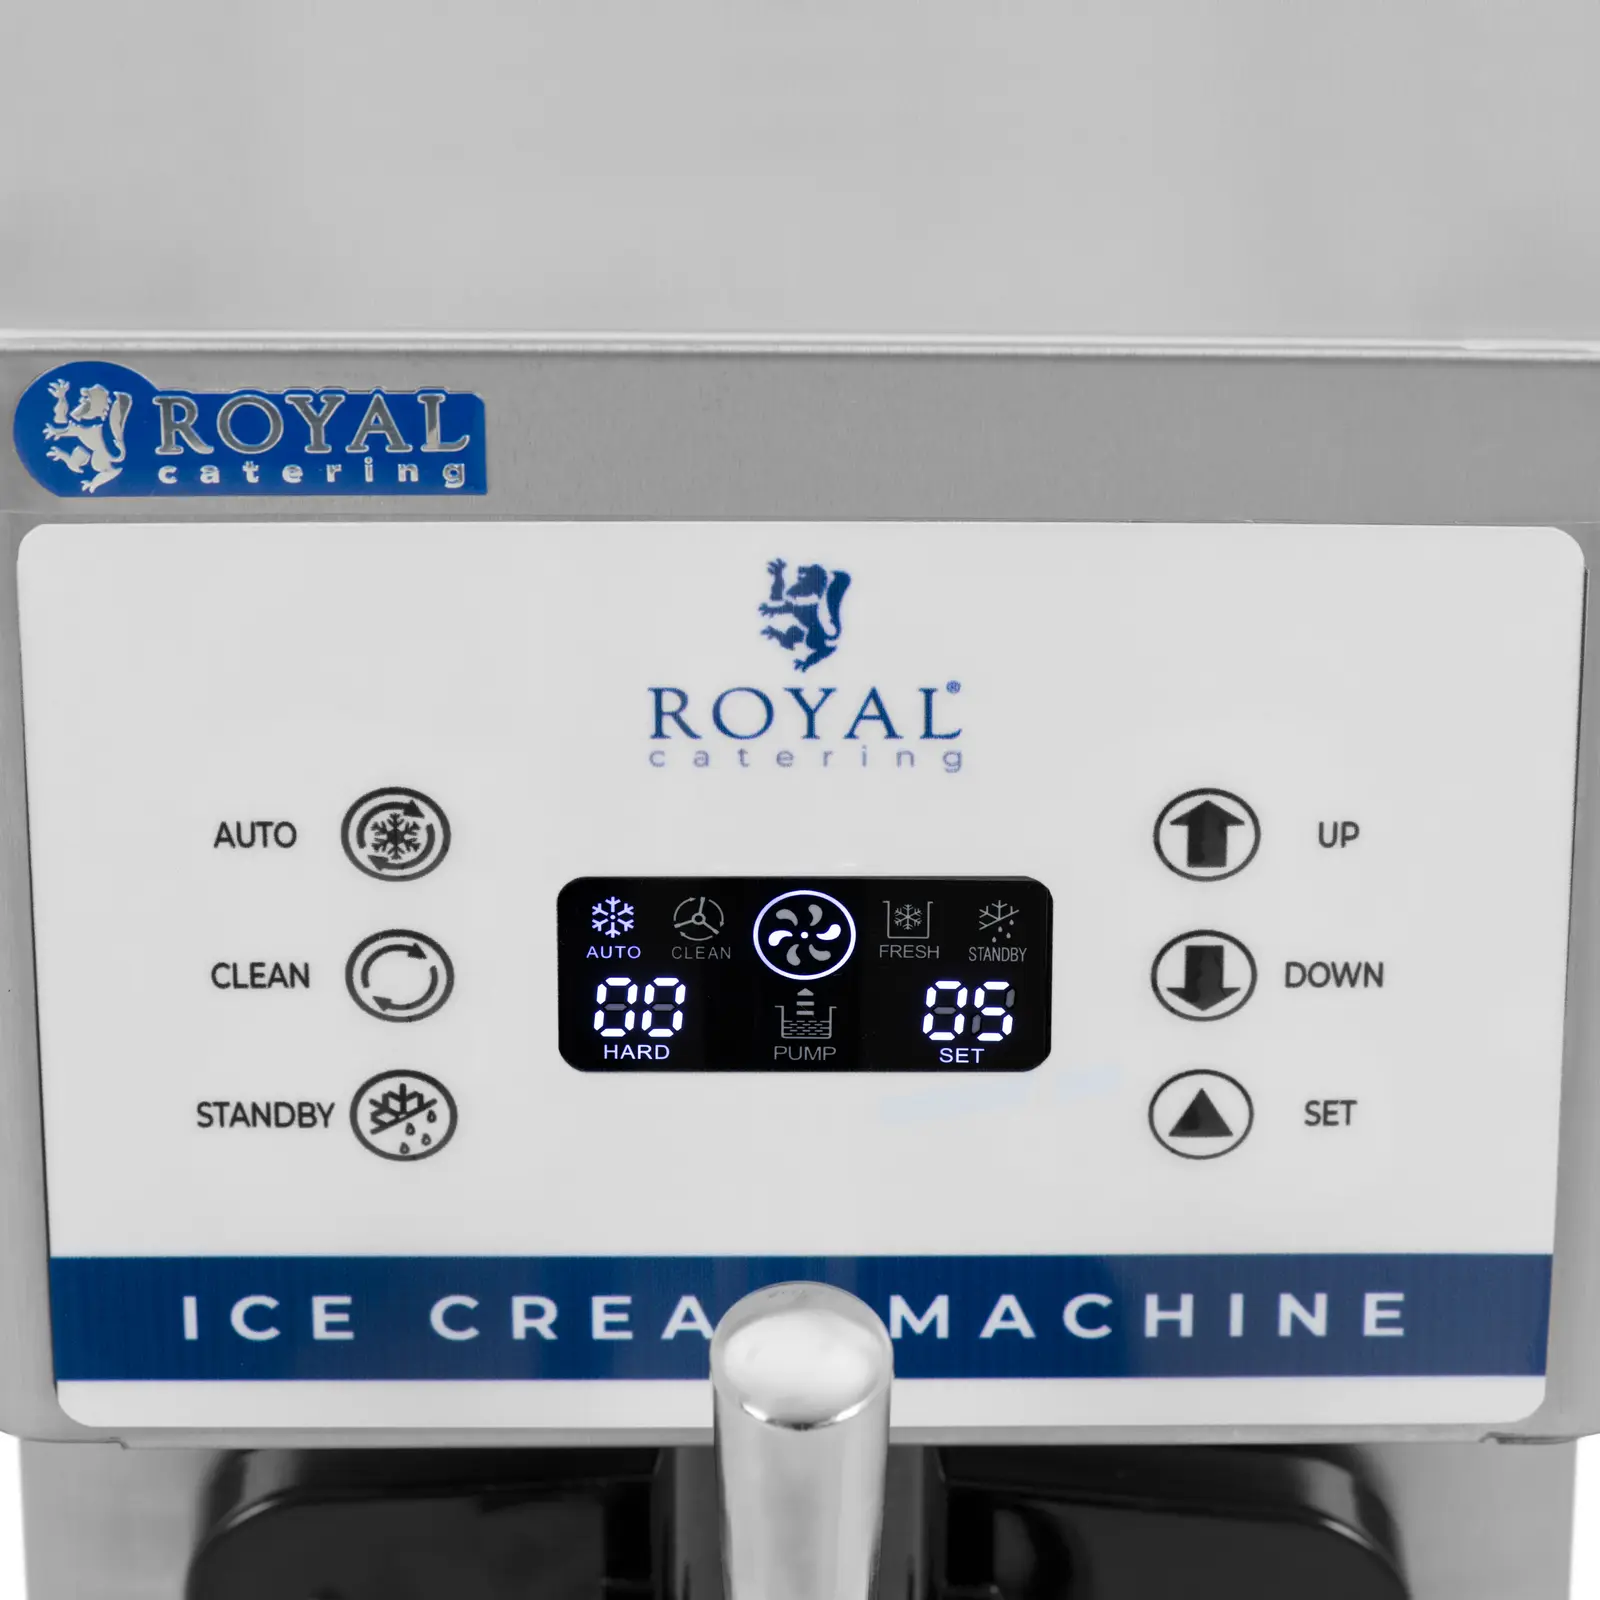 Softeismaschine - 800 W - 13 l/h - LED - Royal Catering